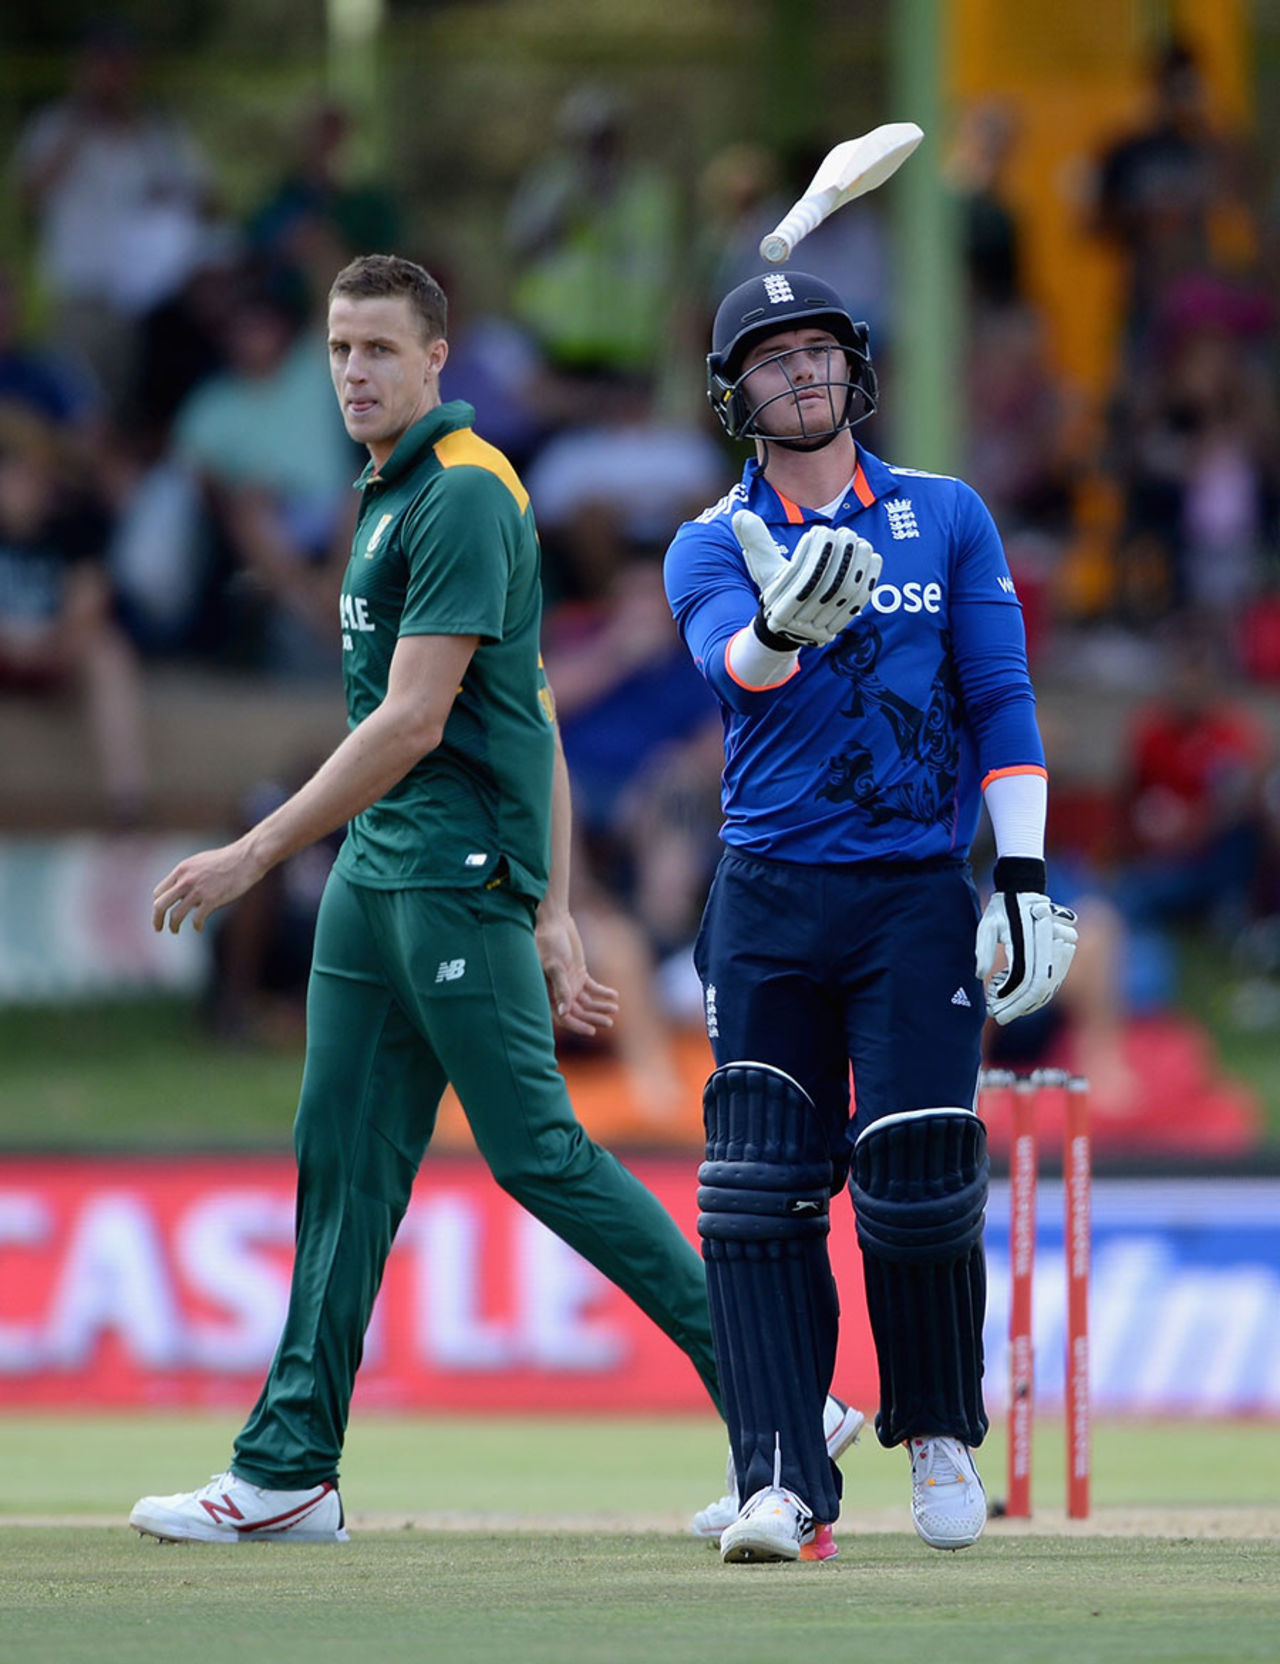 Jason Roy tosses his bat in annoyance after falling for 48, South Africa v England, 1st ODI, Bloemfontein, February 3, 2016